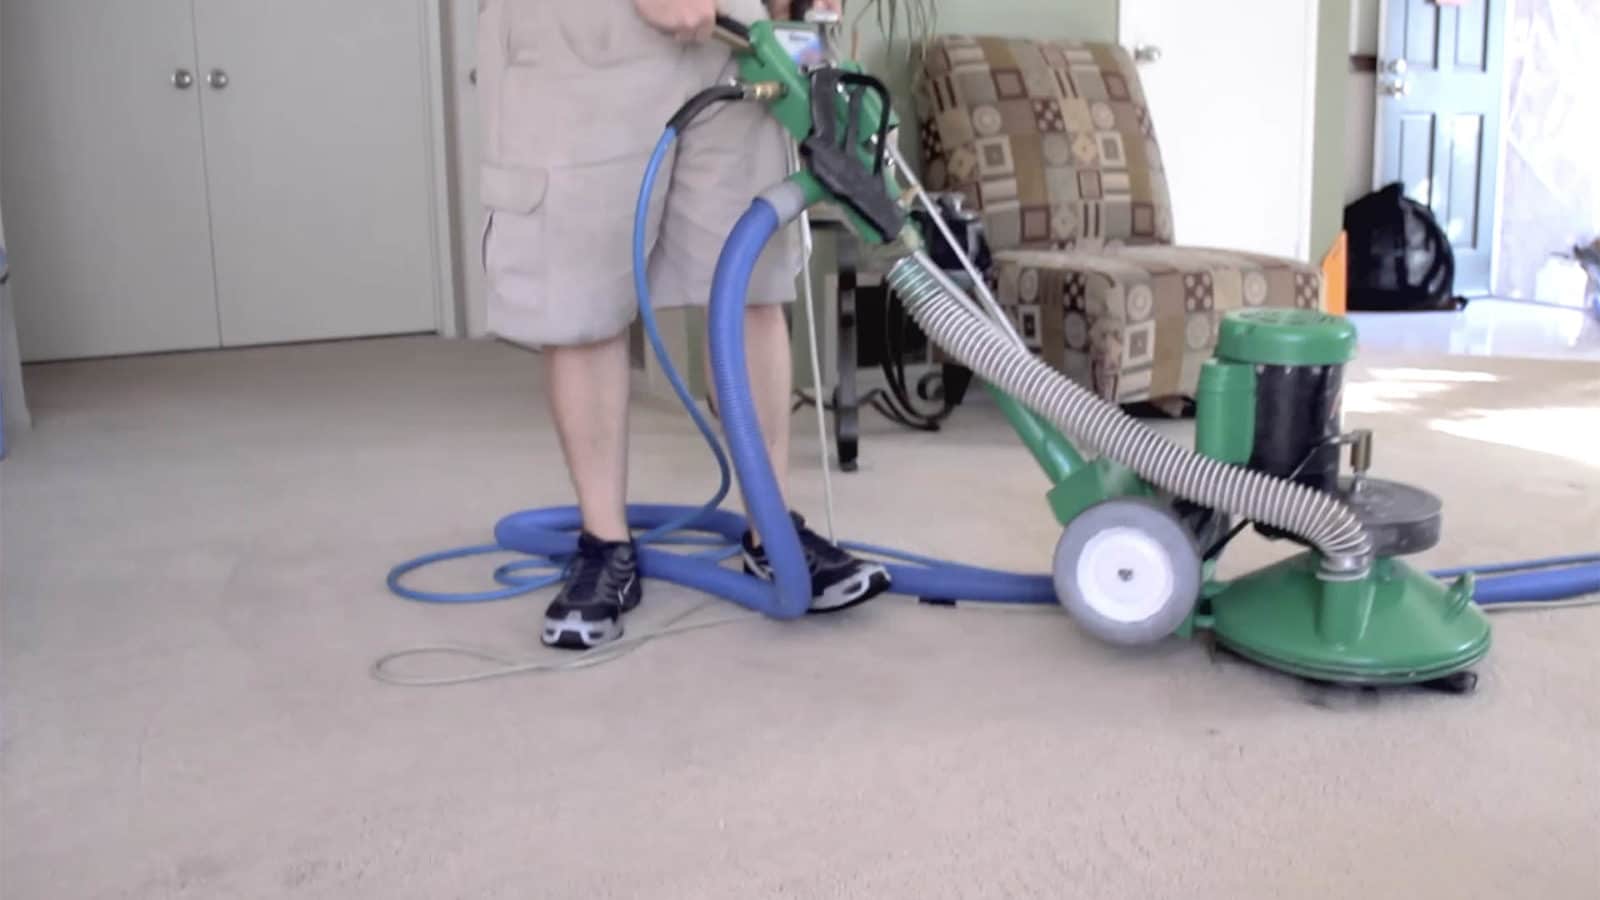 Carpet Cleaning tool being used on carpet